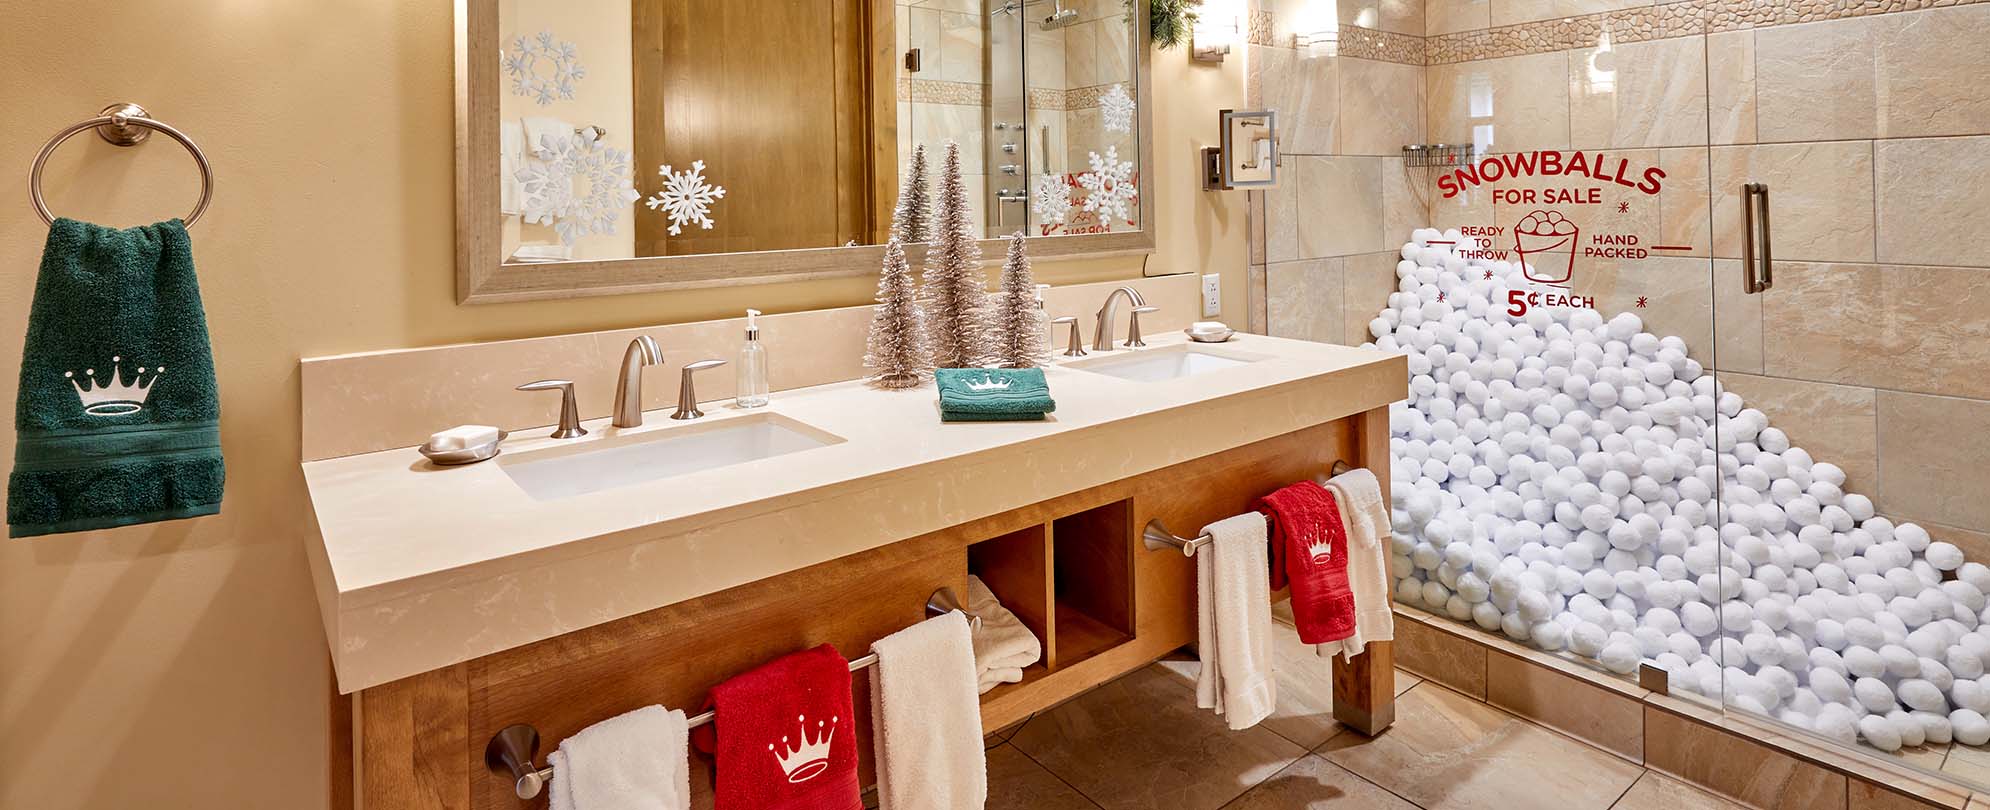 A decorated Hallmark Channel Countdown to Christmas Holiday suite bathroom with snowballs filling the walk-in shower at Club Wyndham Resort at Avon.